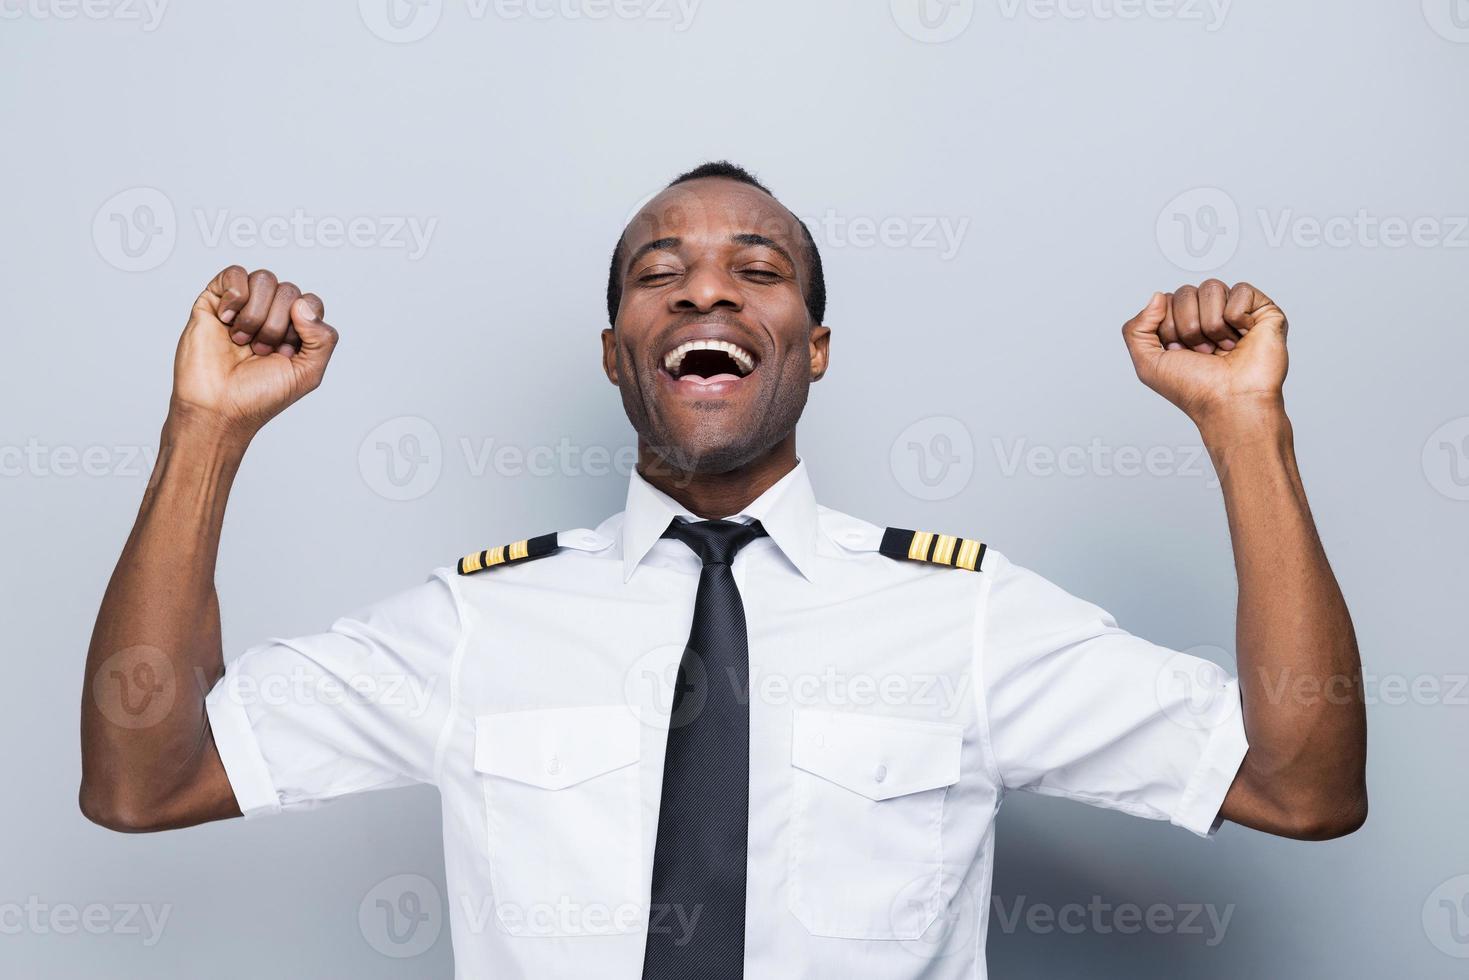 Successful pilot. Happy African pilot in uniform gesturing and keeping eyes closed while standing against grey background photo